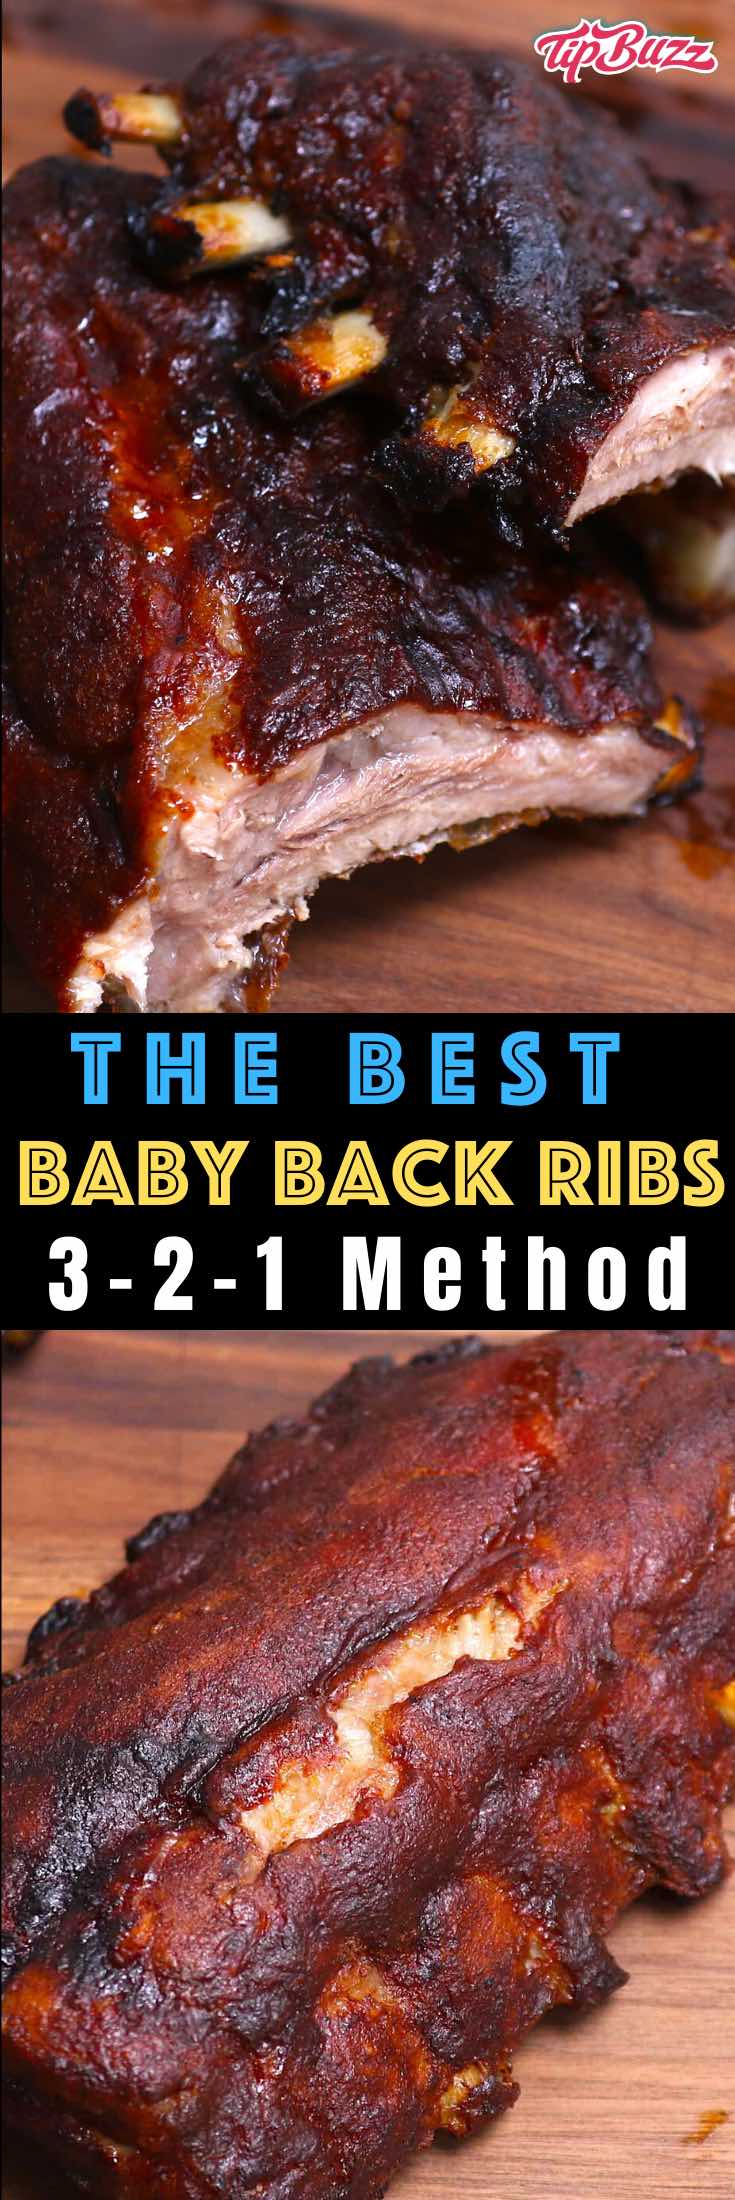 3-2-1 Ribs are extra-tender with delicious BBQ flavors from three stages of smoking. Learn how to make perfect #321ribs !